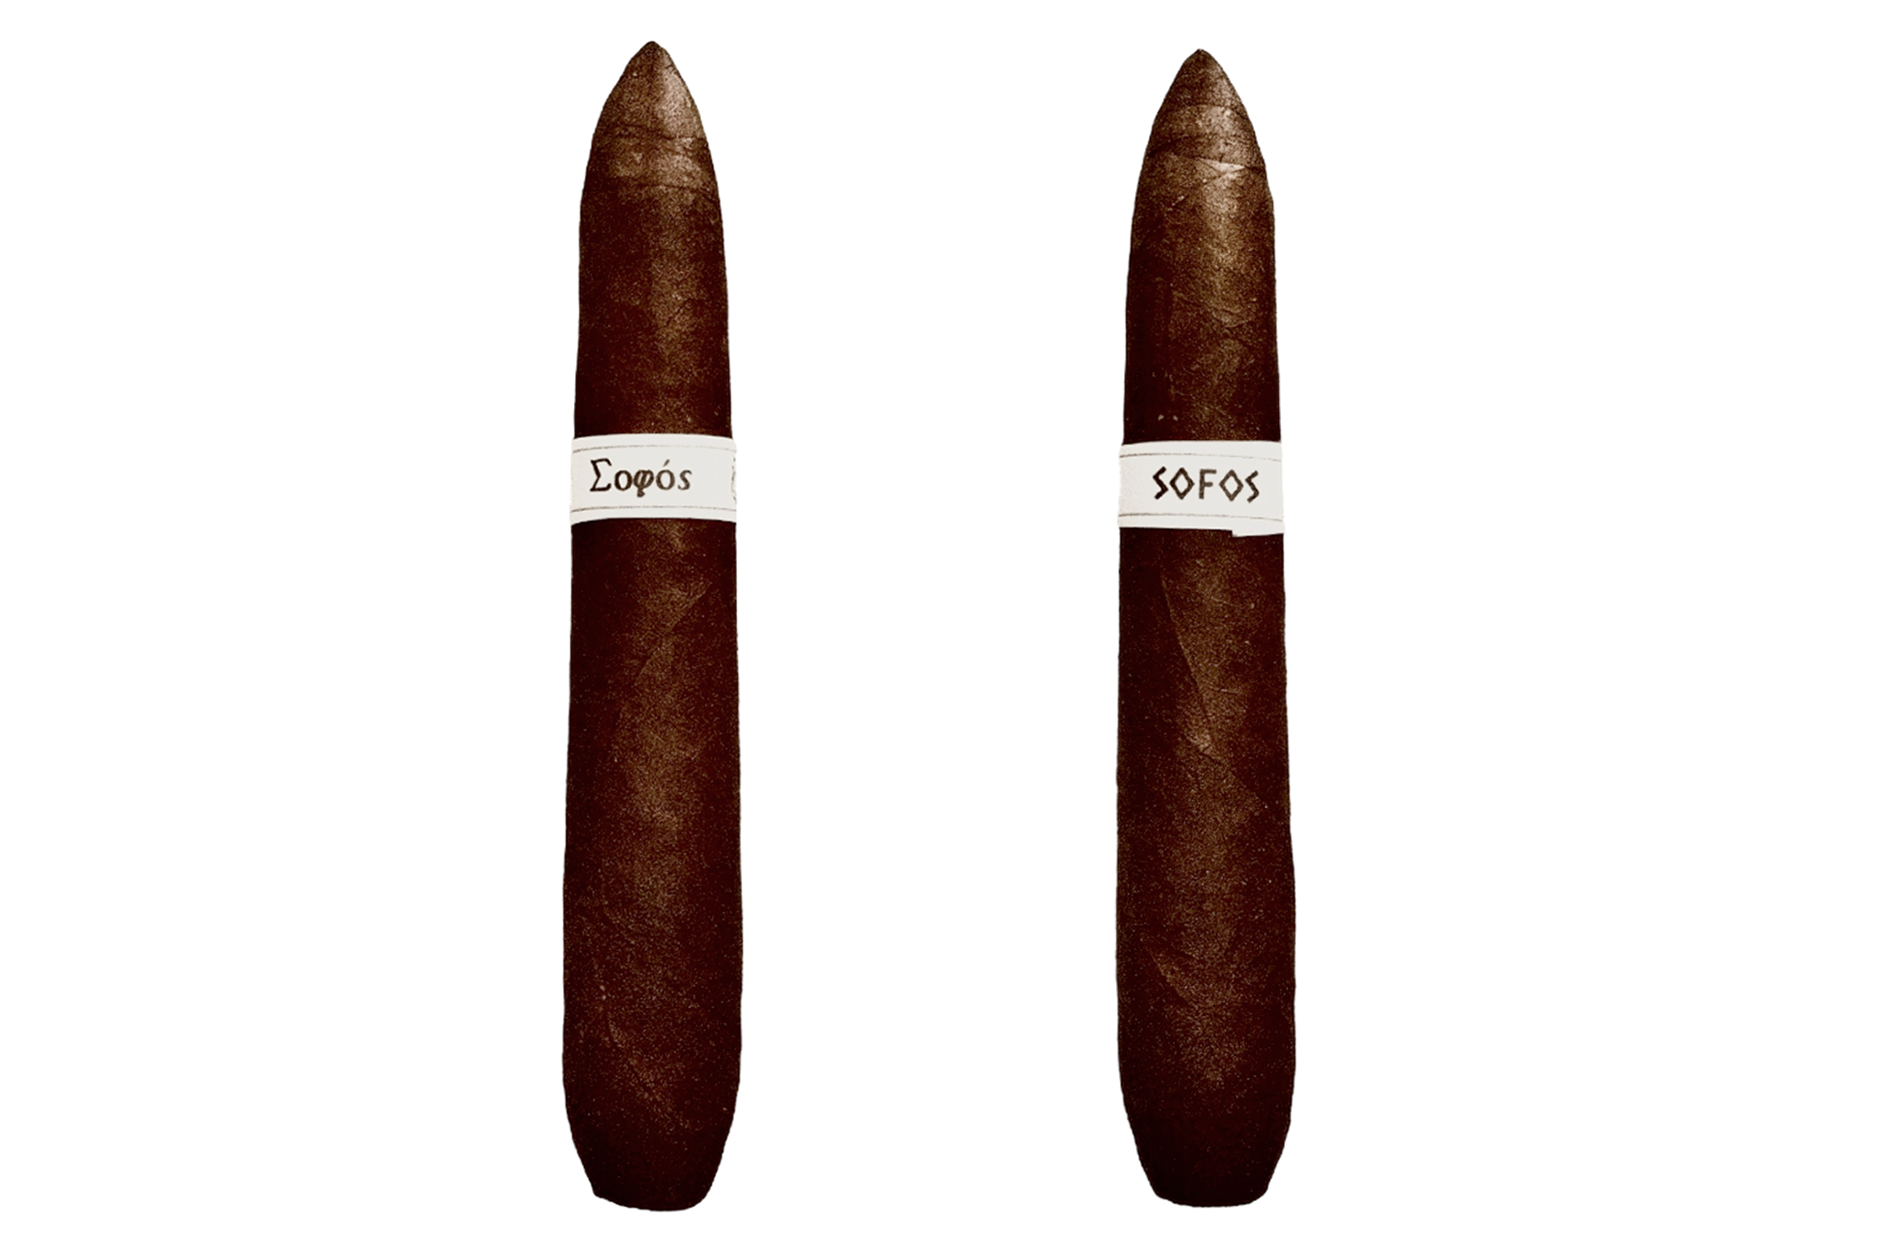 Home - Hemmys finest Cigars